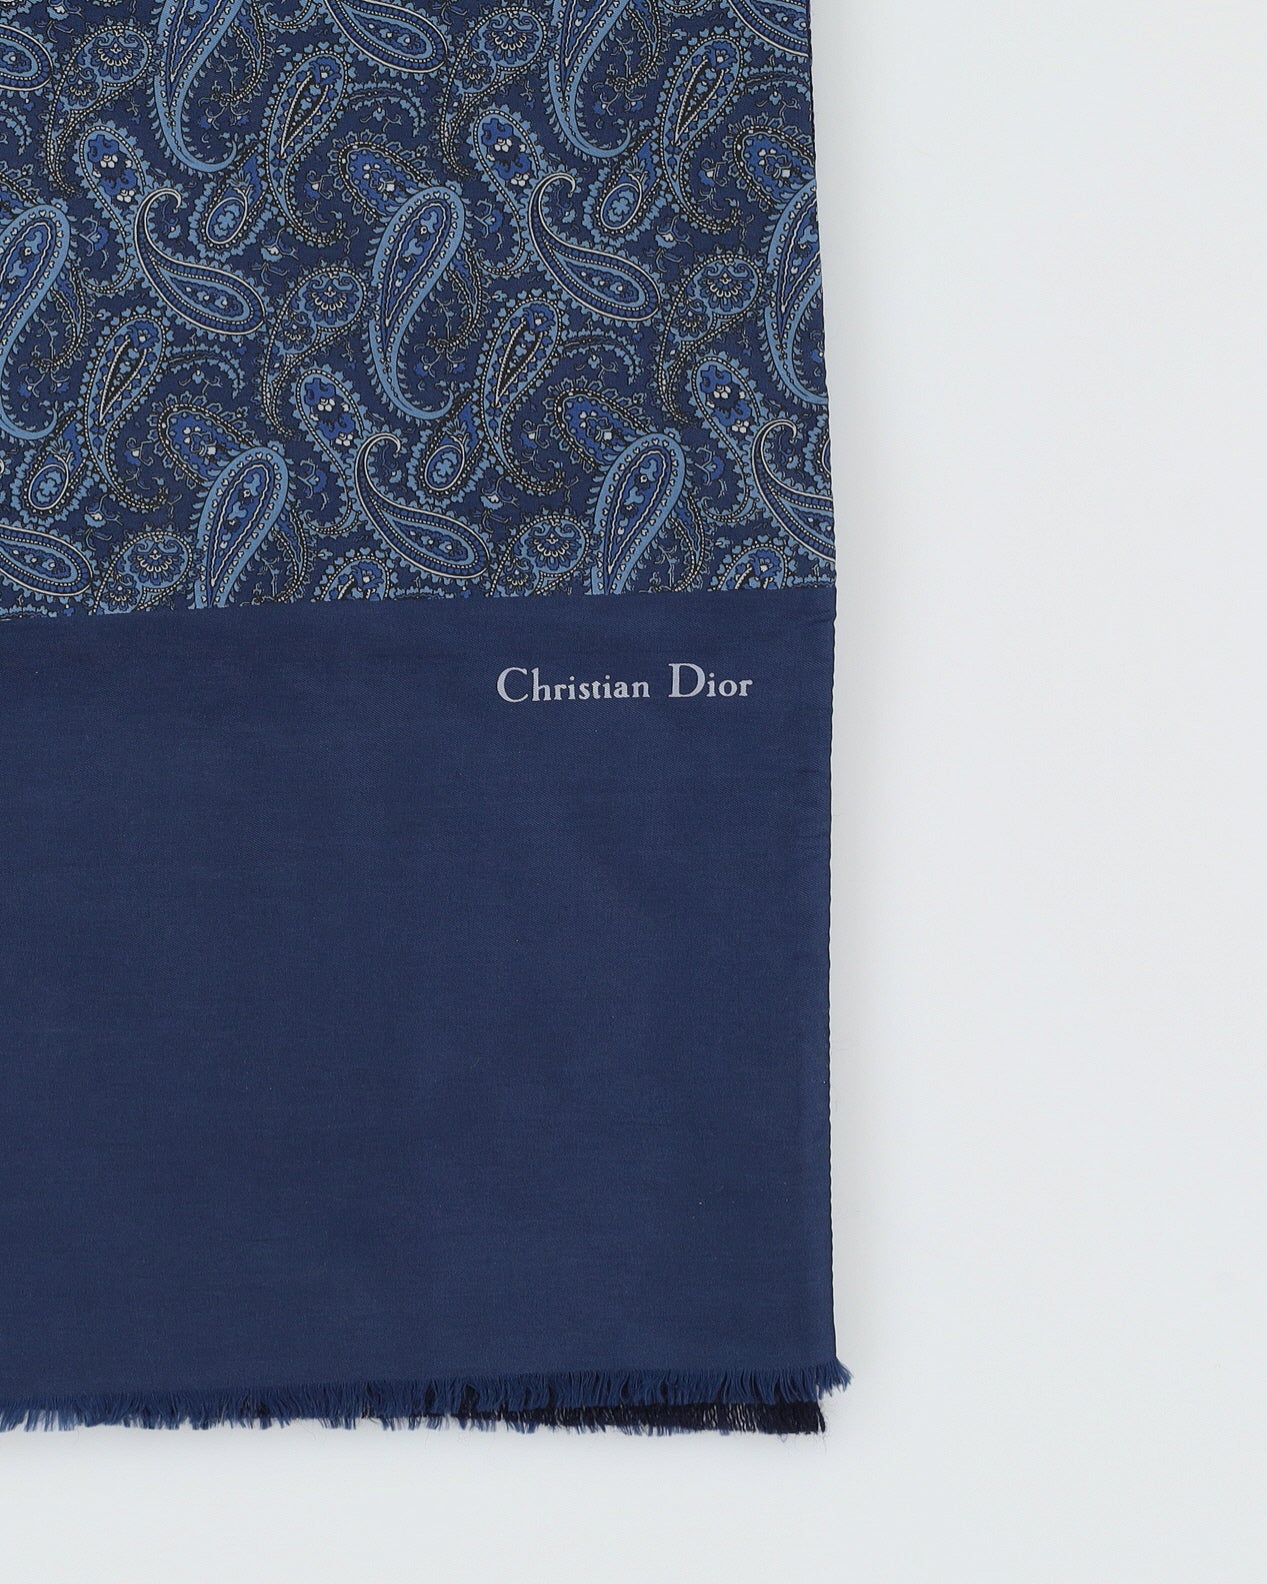 Dior blue paisley patterned dinner scarf